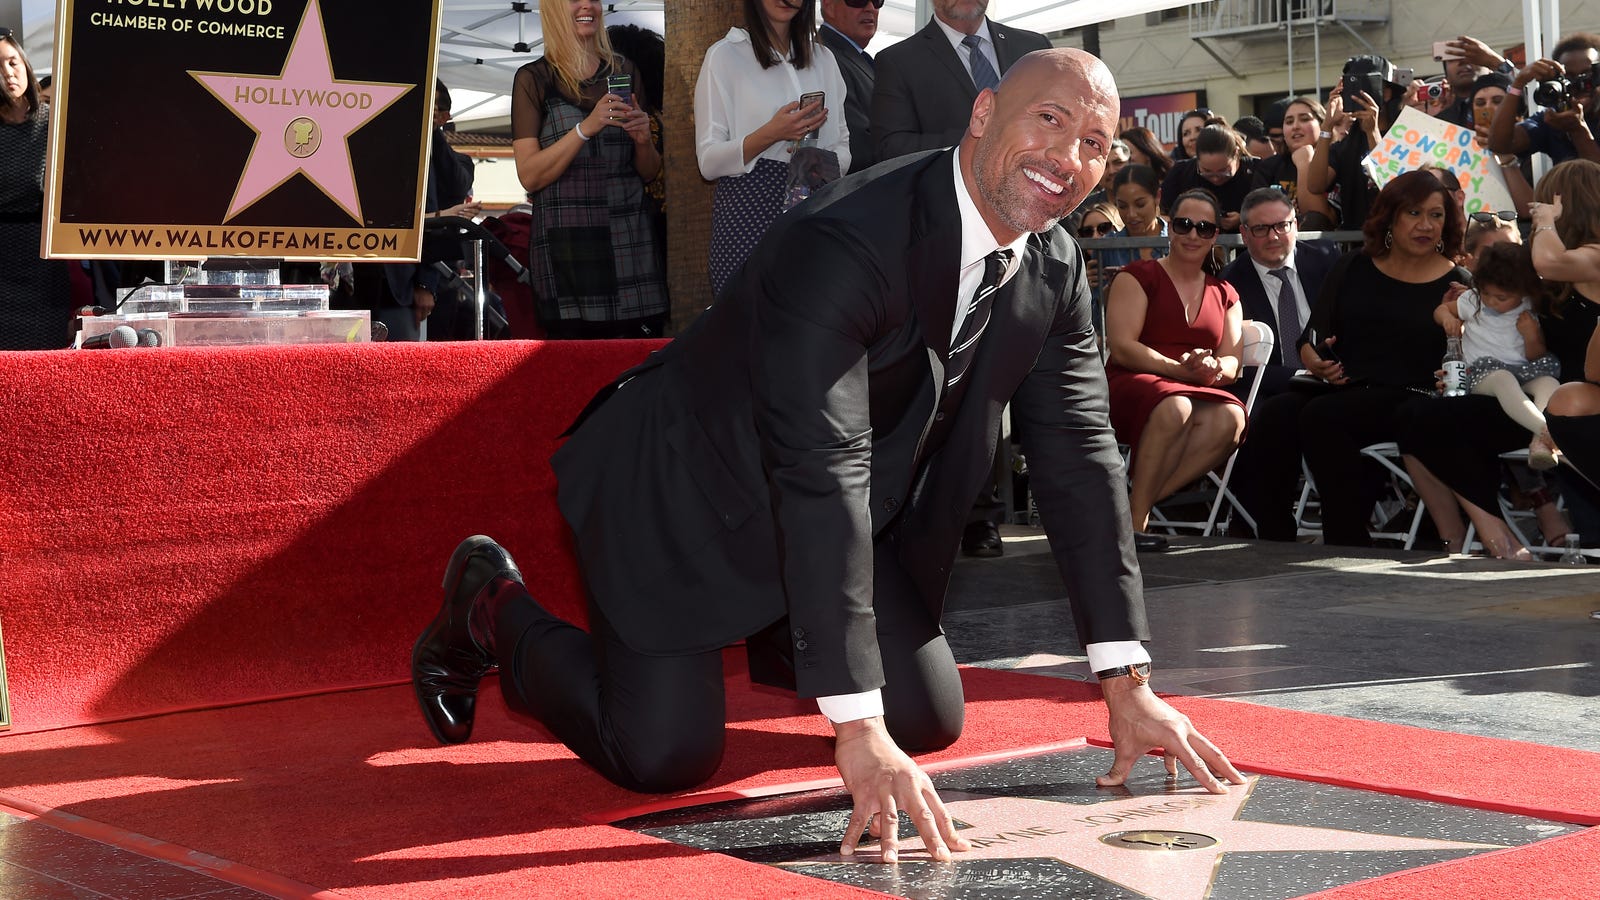 Dwayne Johnson to host new reality competition show, as if he wasn't busy enough already